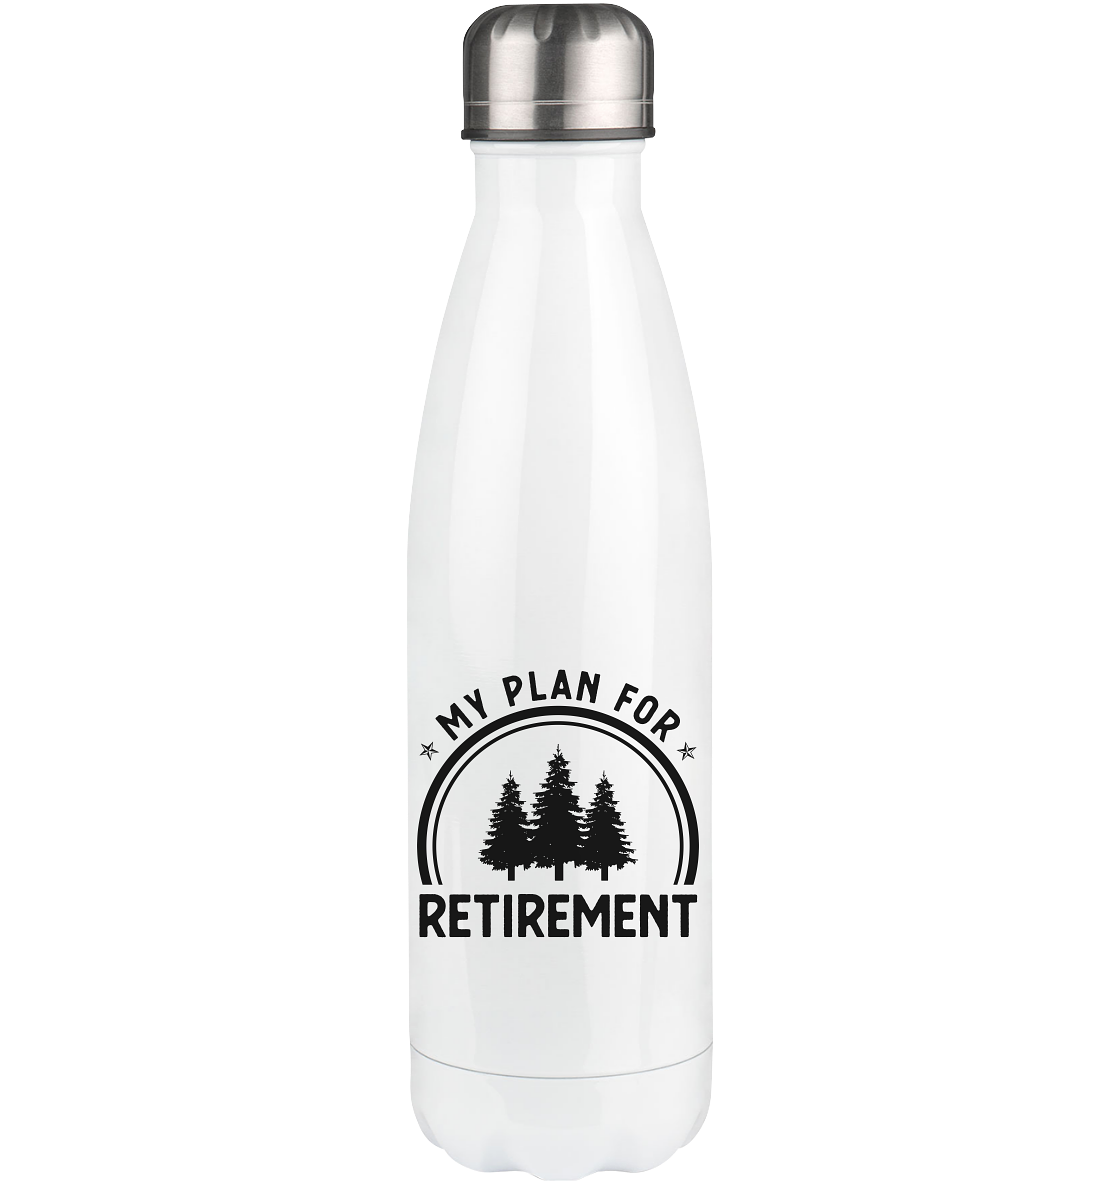 My Plan For Retirement 3 - Edelstahl Thermosflasche camping UONP 500ml